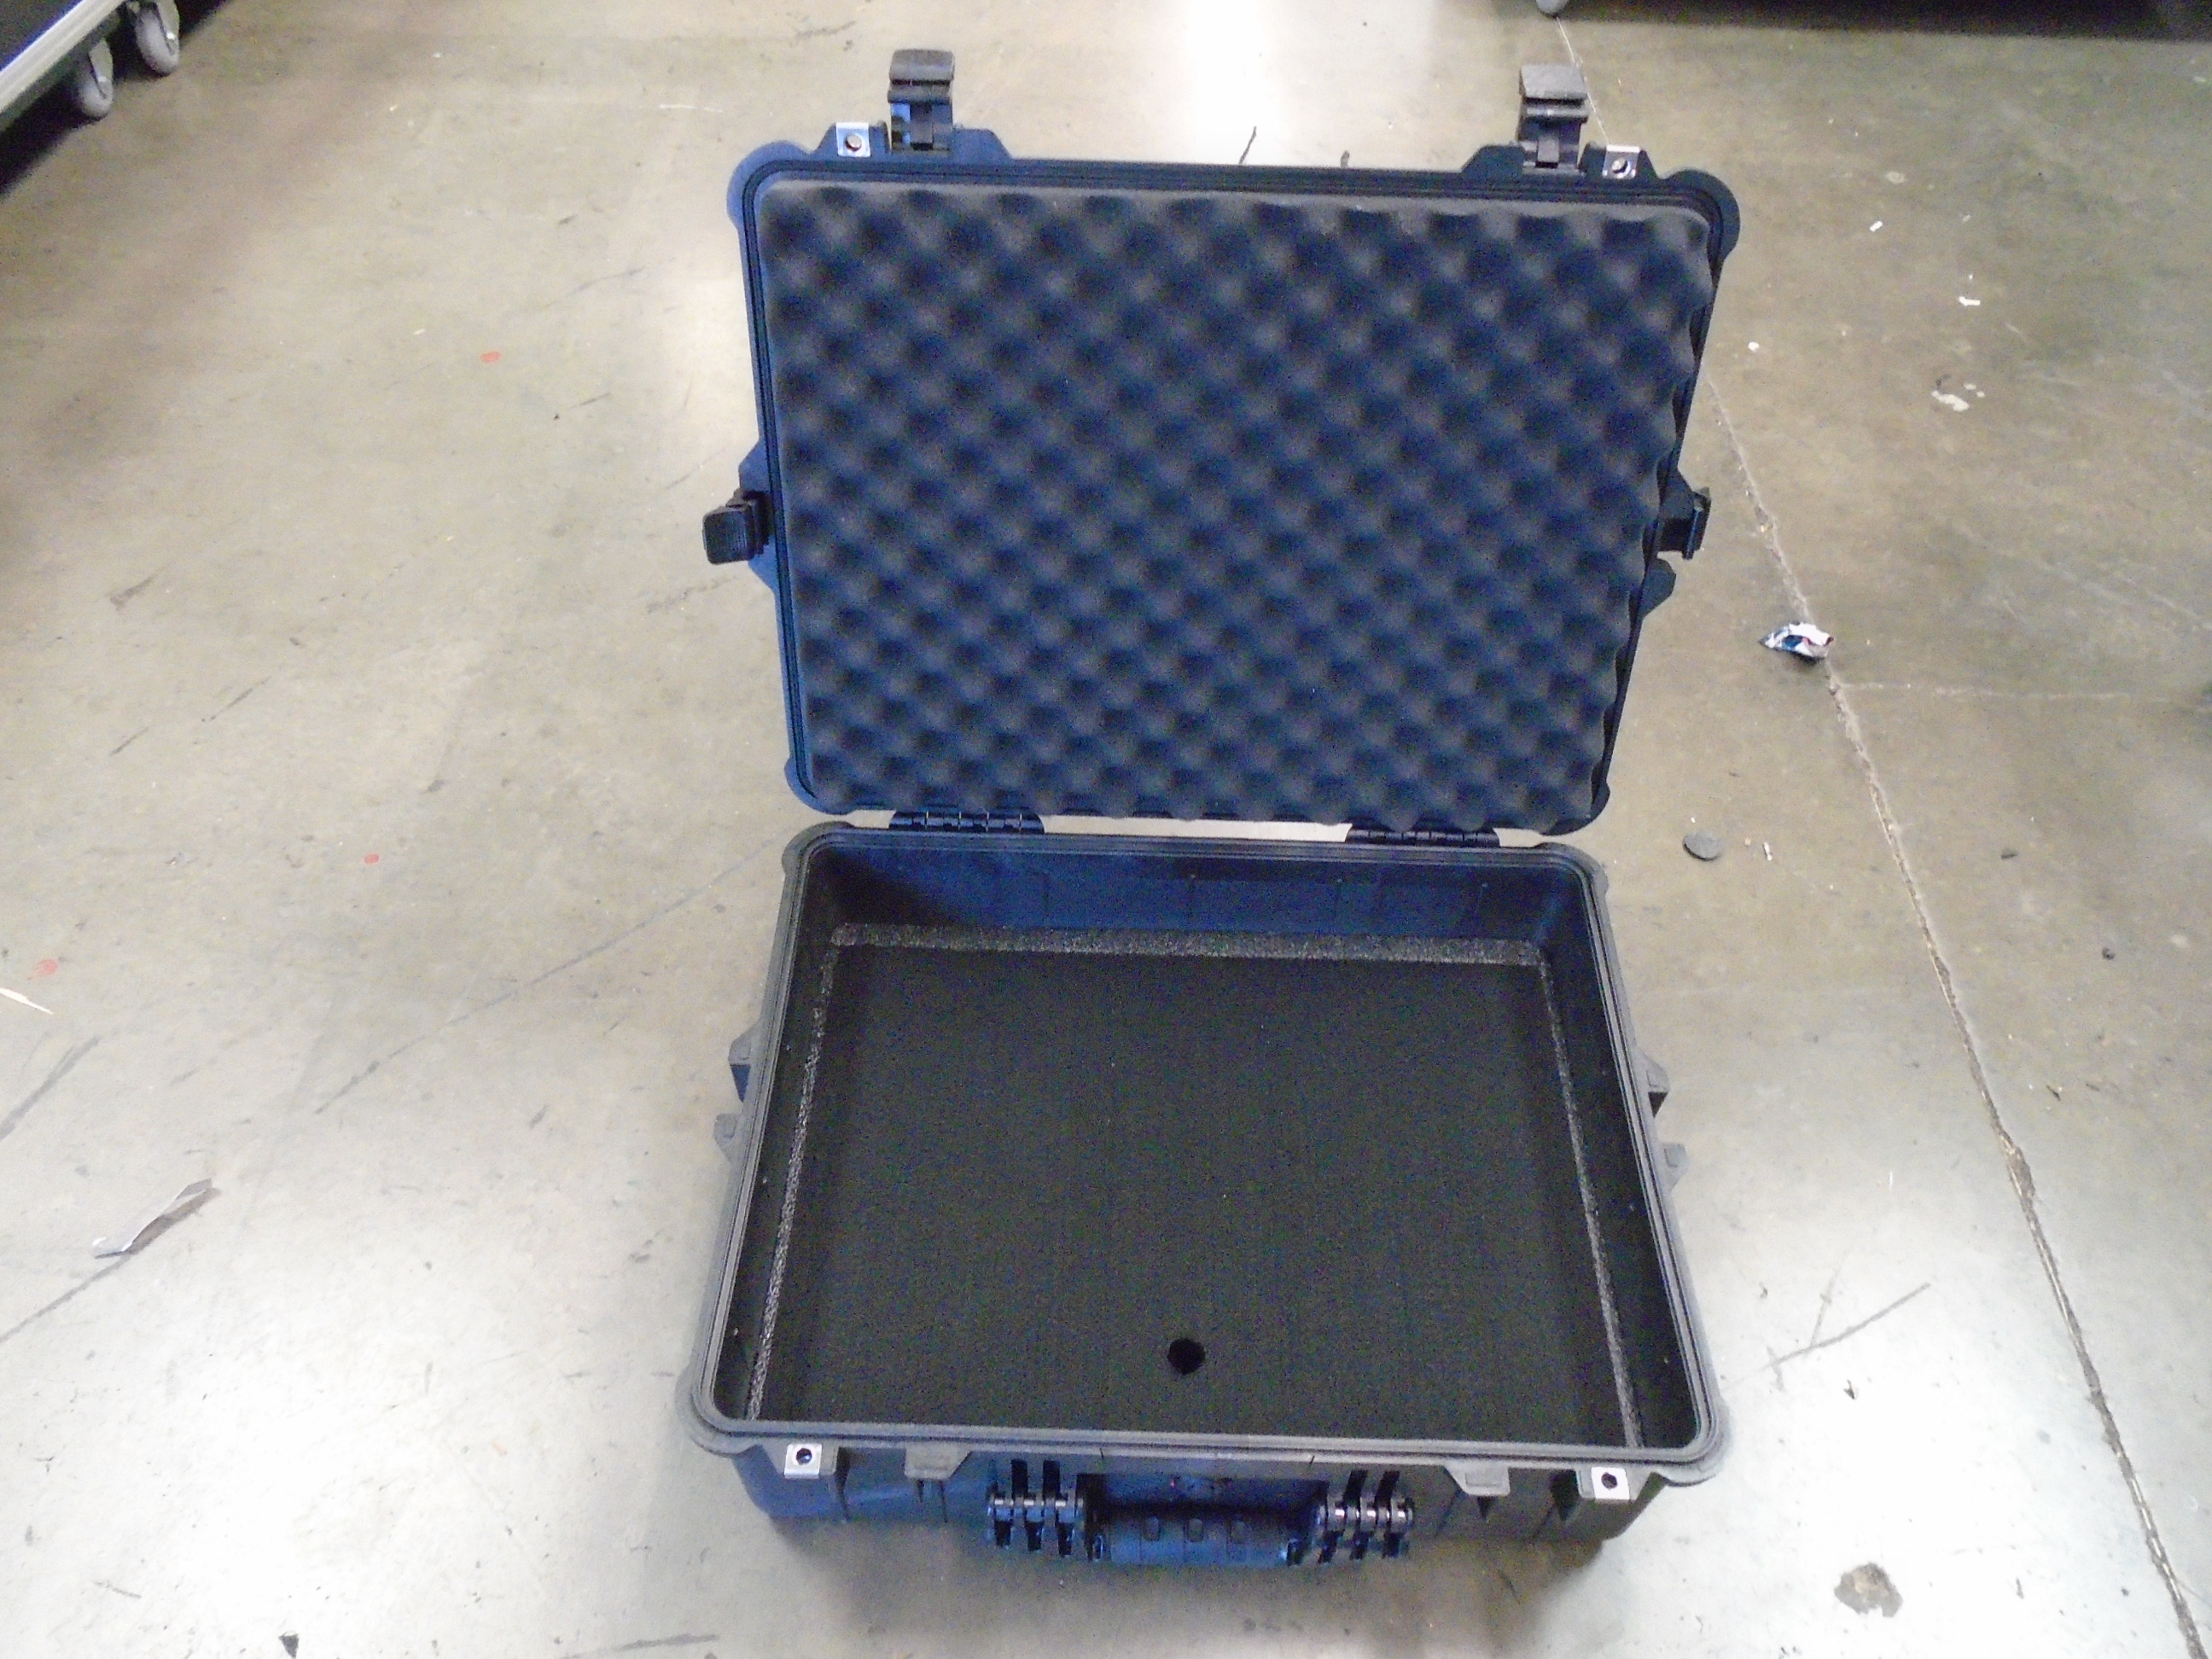 Print # 7061 - Retrofit Existing Pelican 1600 for BTR Antenna Kit By Nelson Case Corp